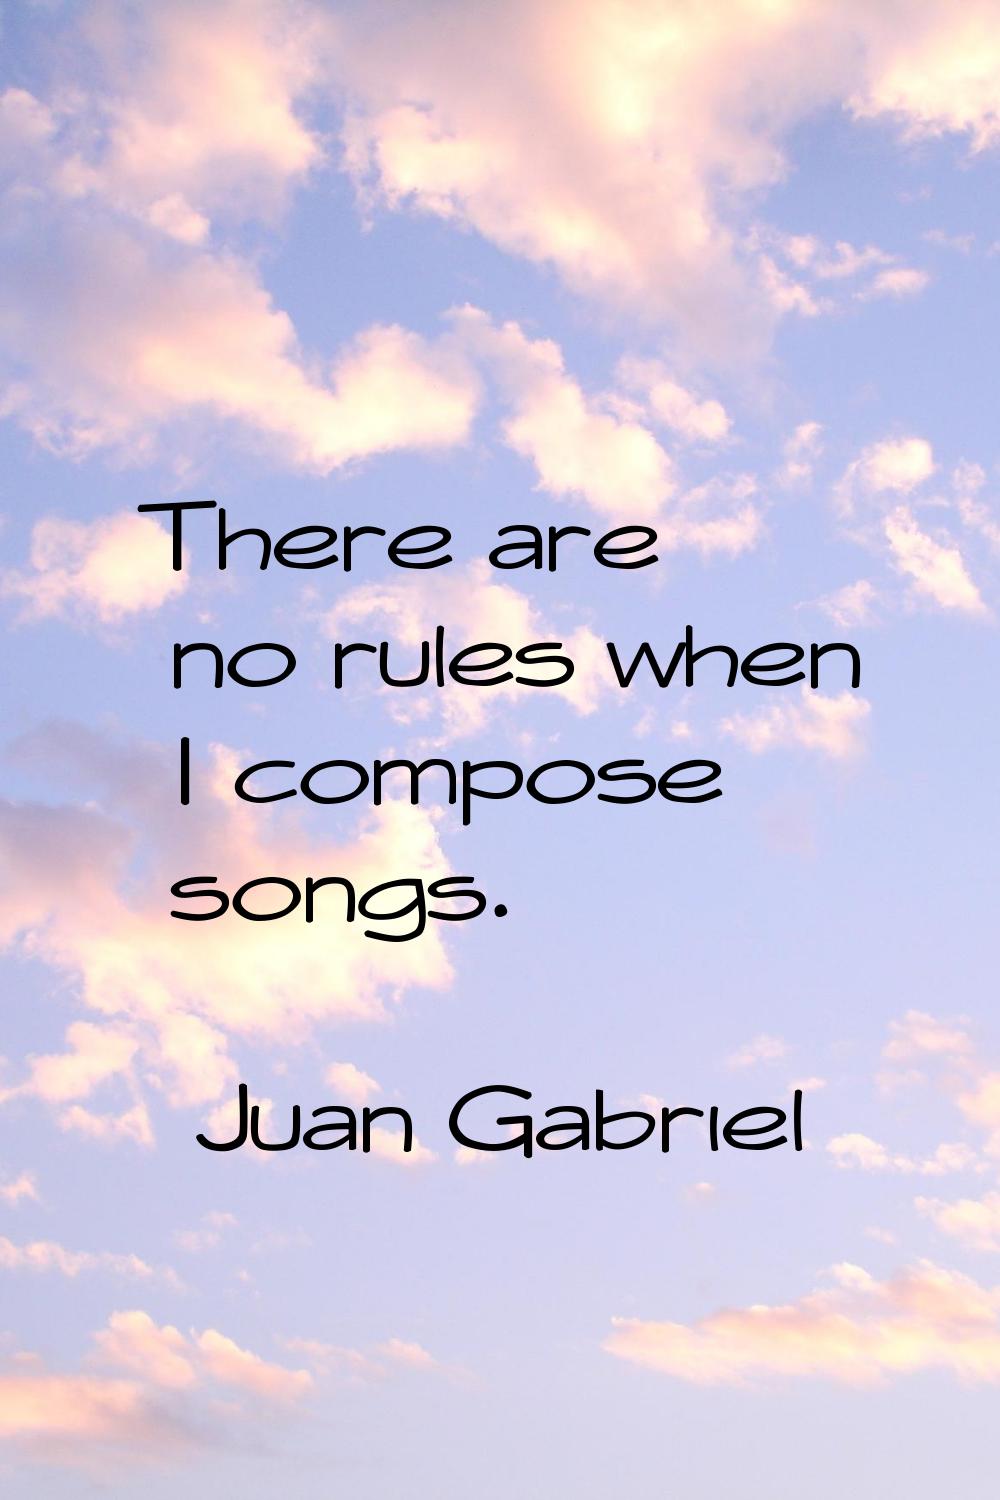 There are no rules when I compose songs.